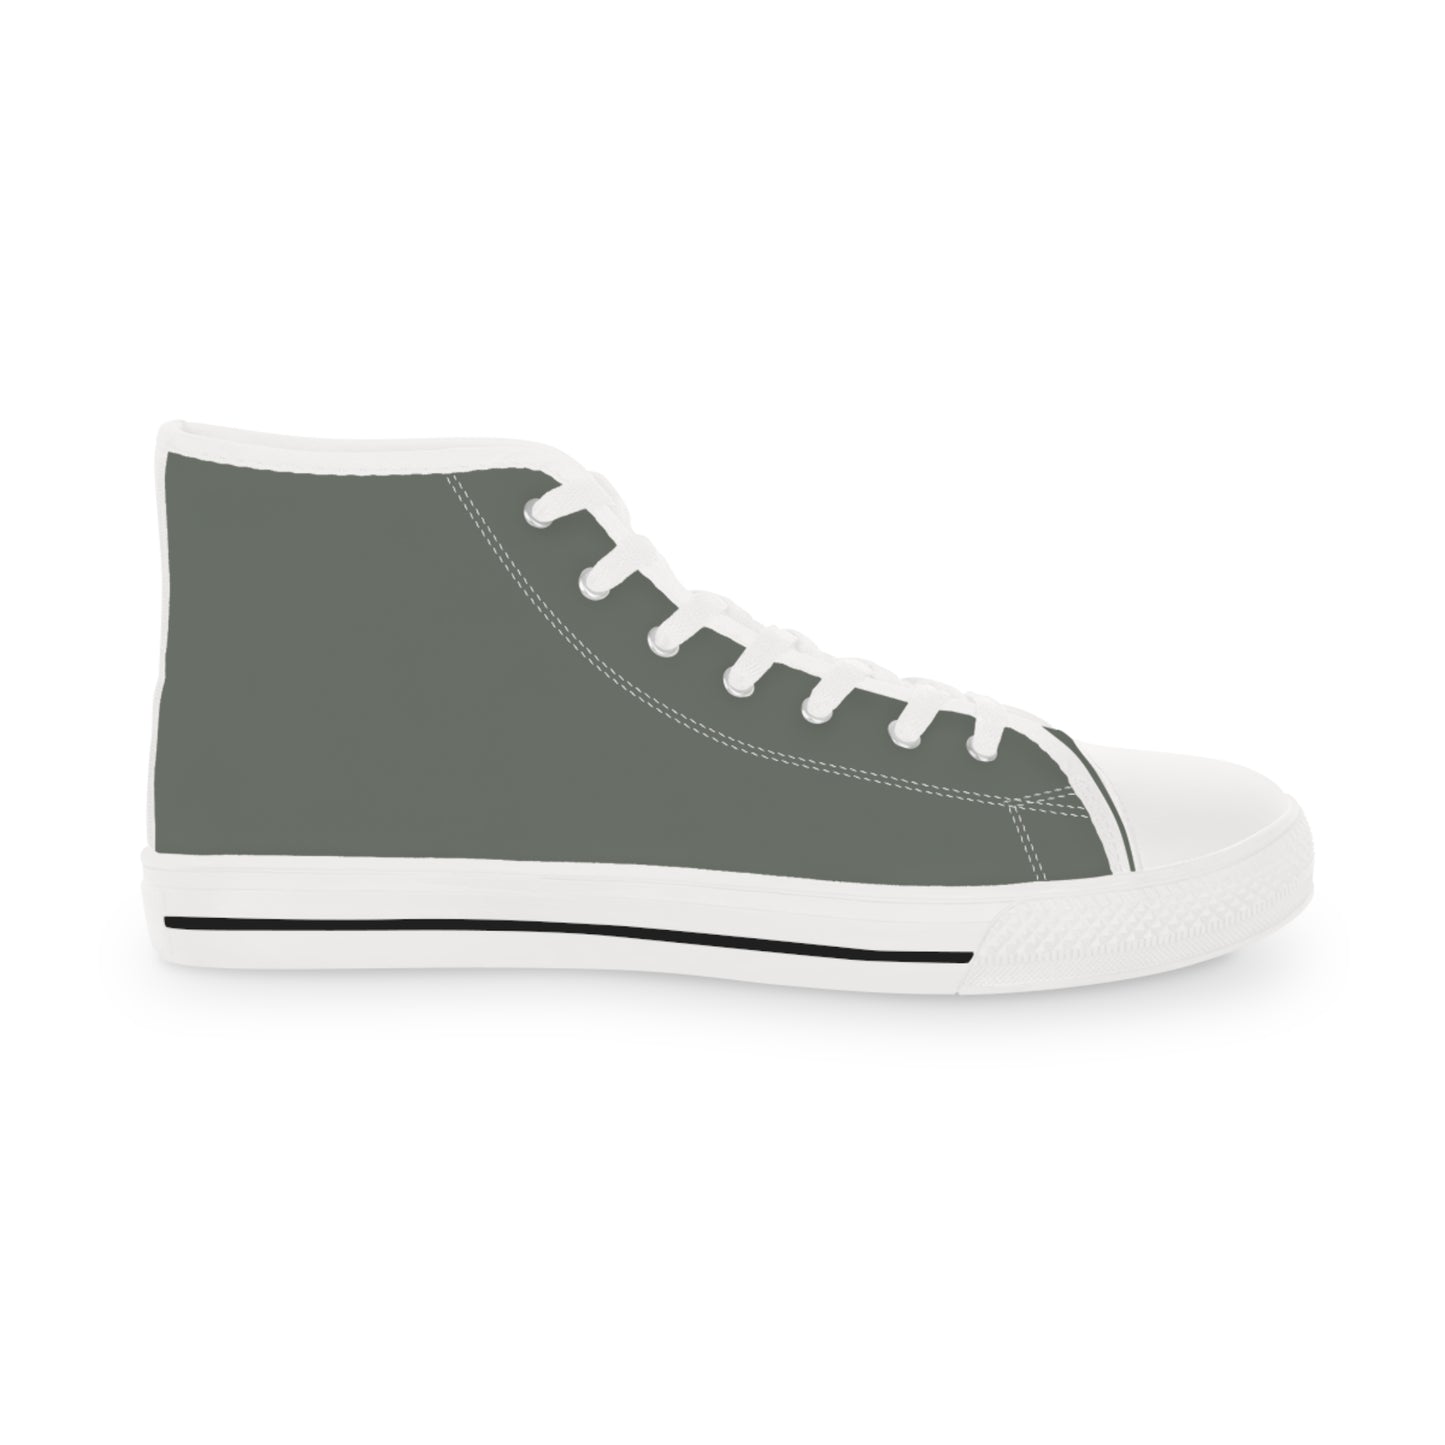 Men's Canvas High Top Solid Color Sneakers - Drab Olive Gray US 14 White sole